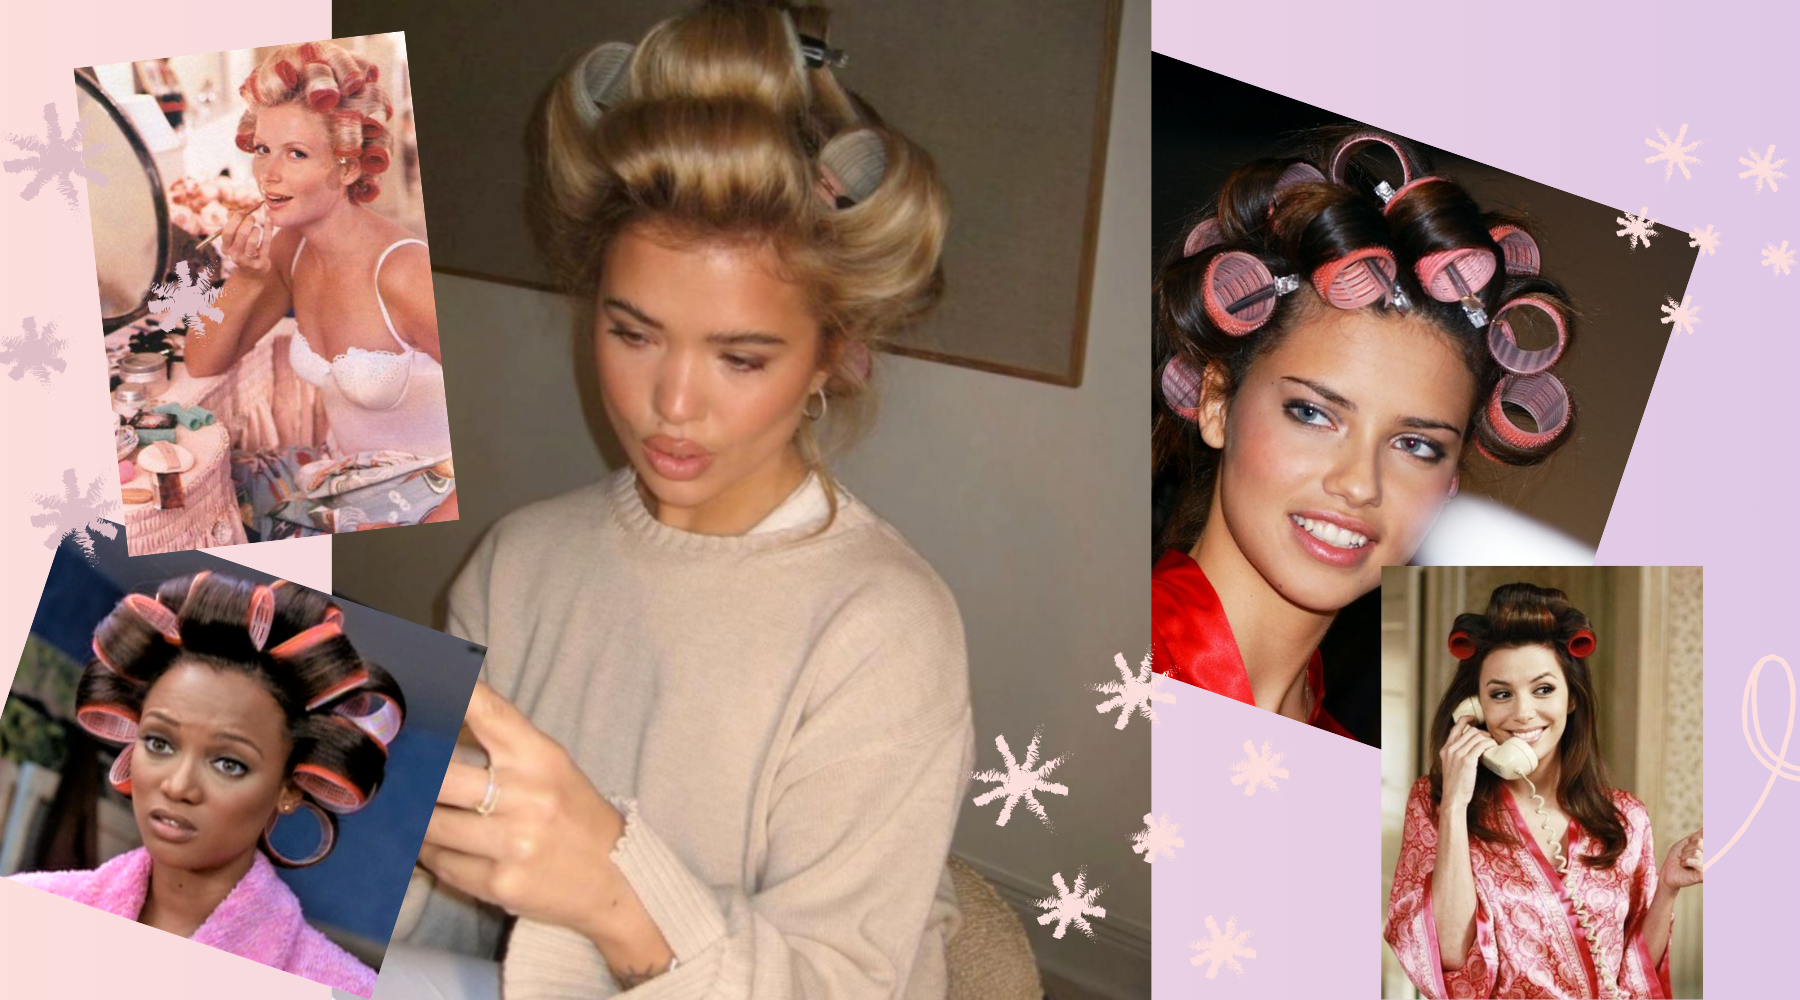 Hot rollers are back, Baby